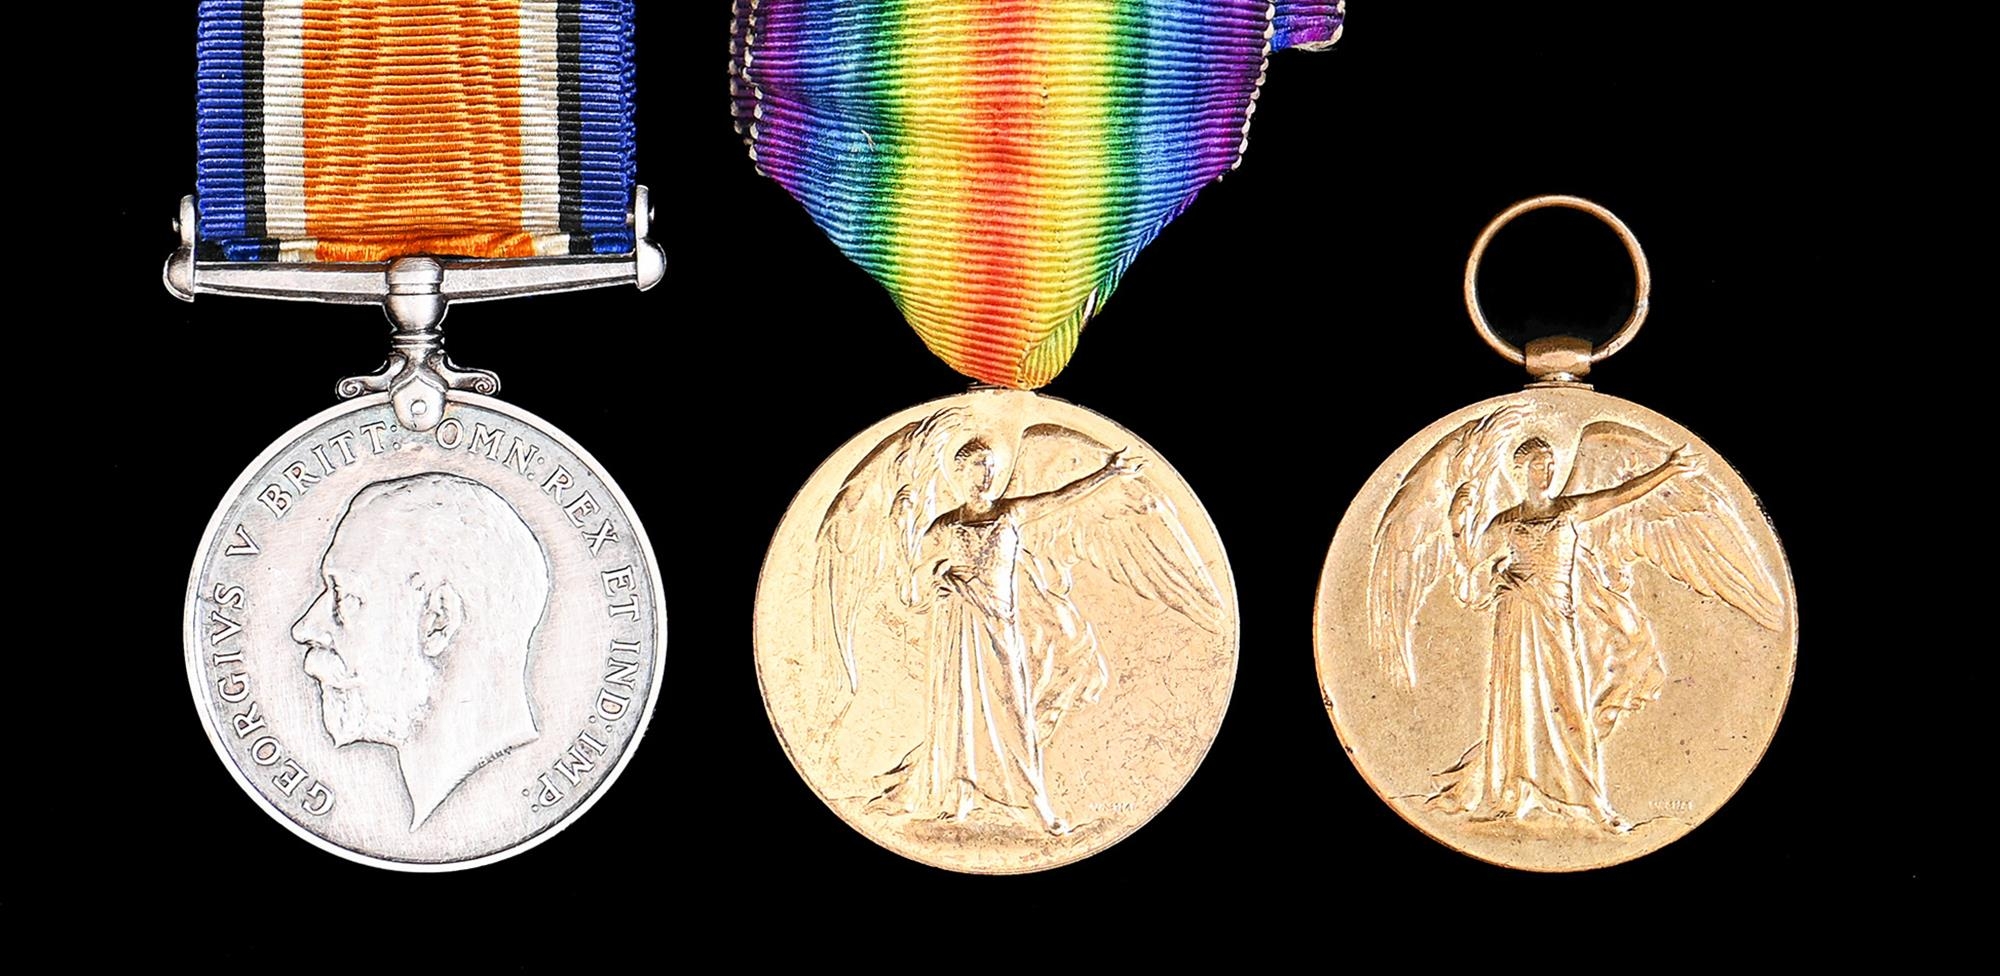 WWI pair, British War Medal and Victory Medal, 230 Cpl E Metcalf, N'd Fus and Victory Medal, 23193